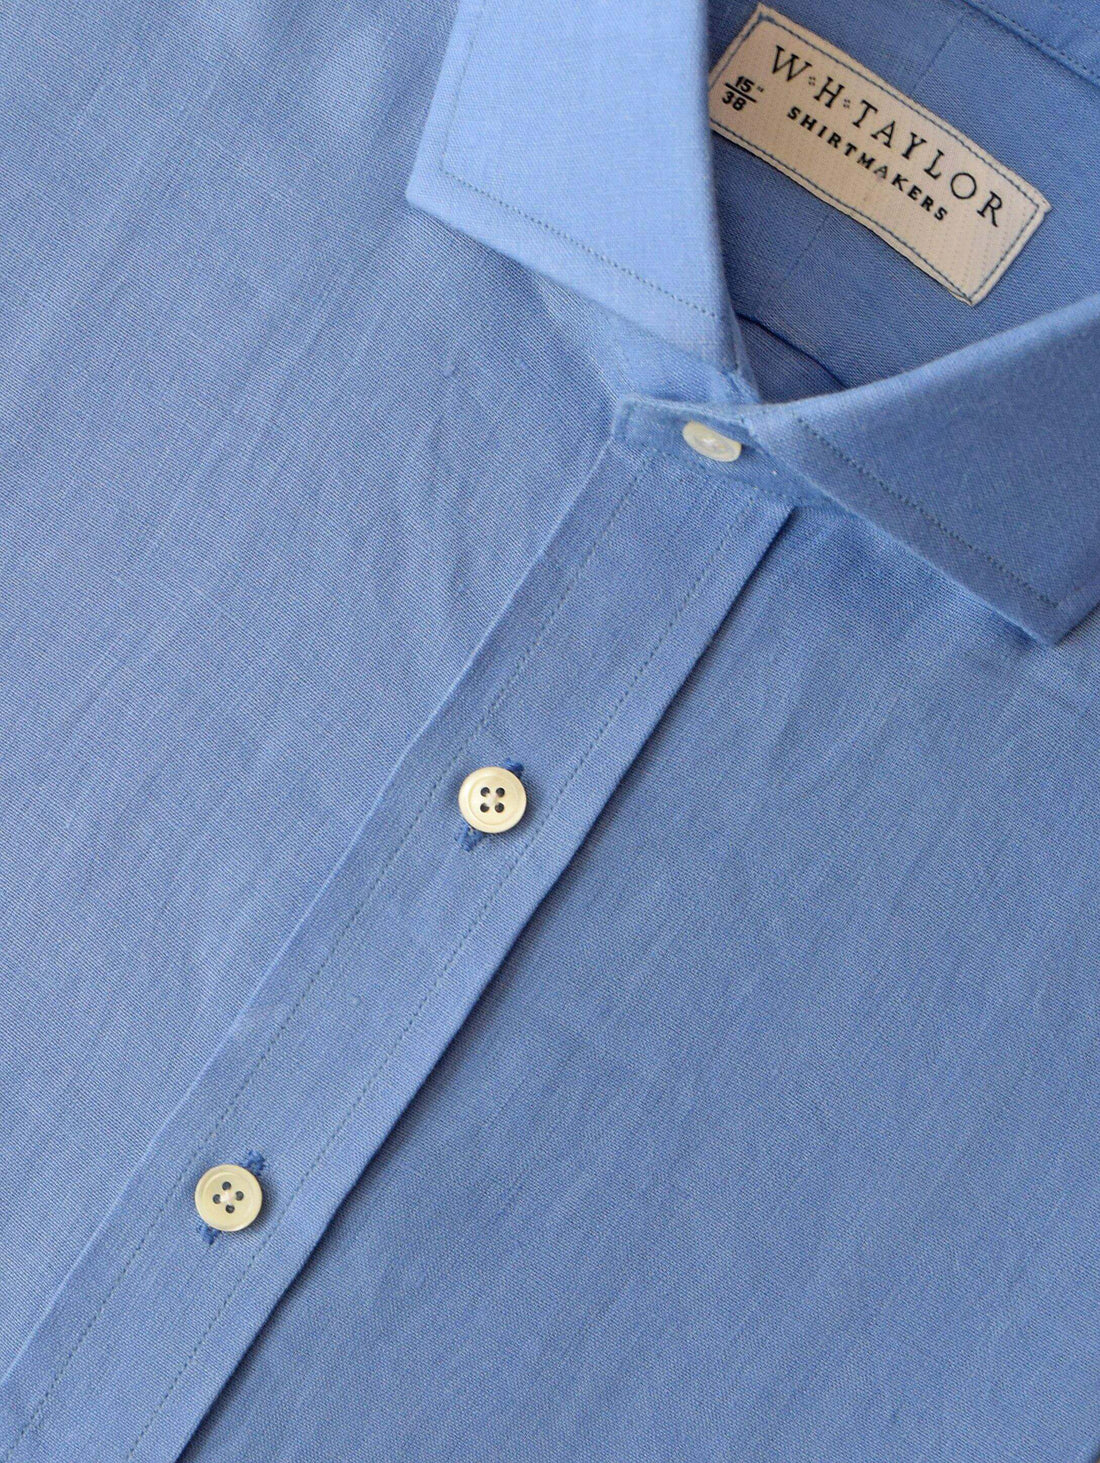 Linen shirts vs cotton – which is better this summer